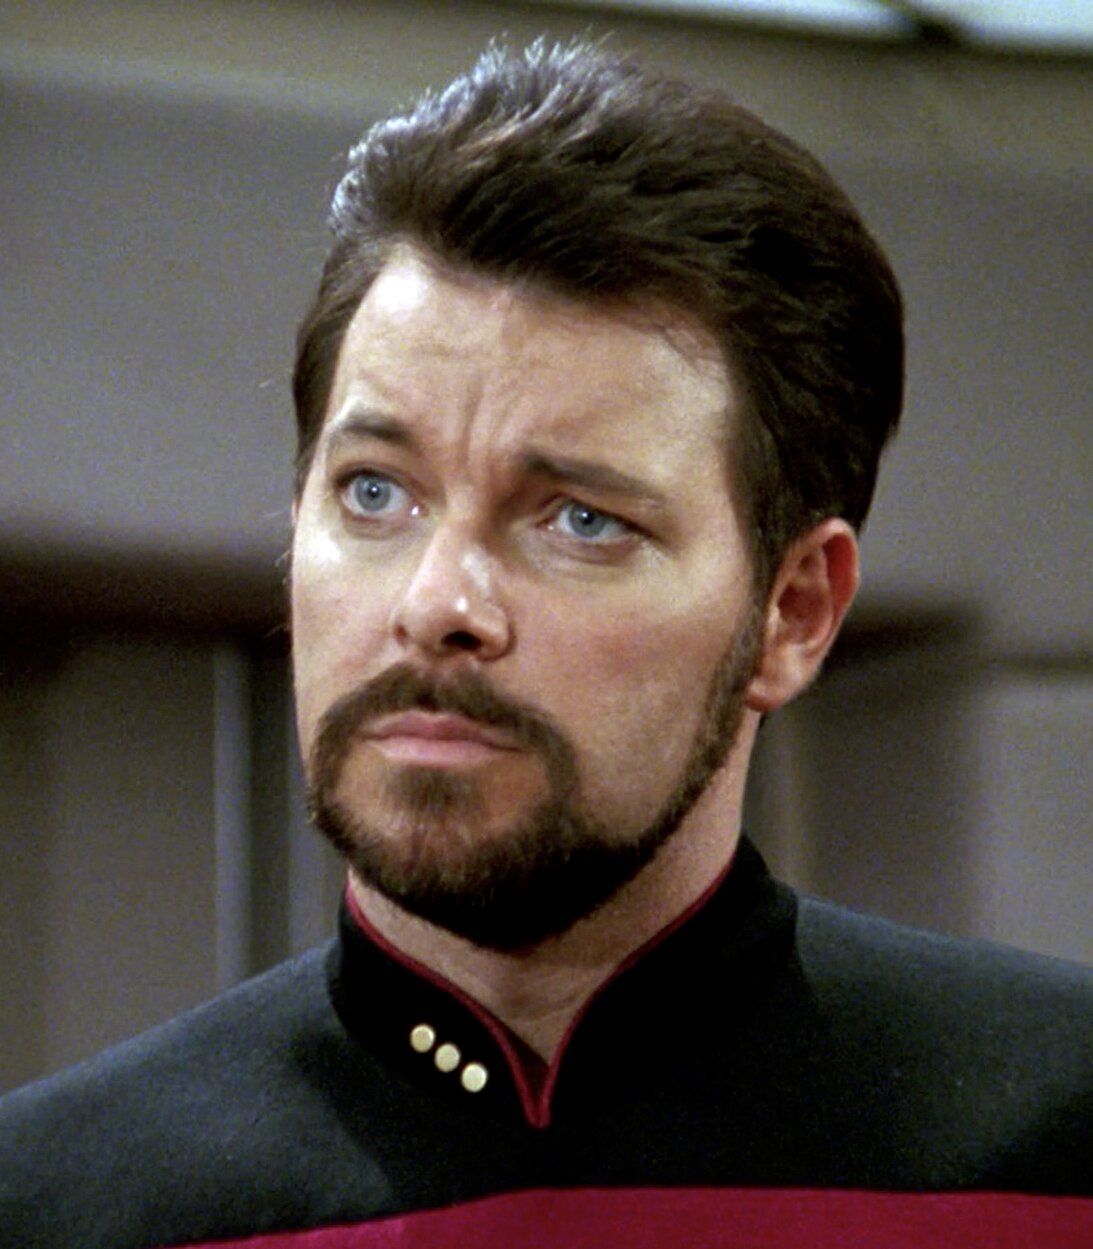 A younger, strapping version of Riker